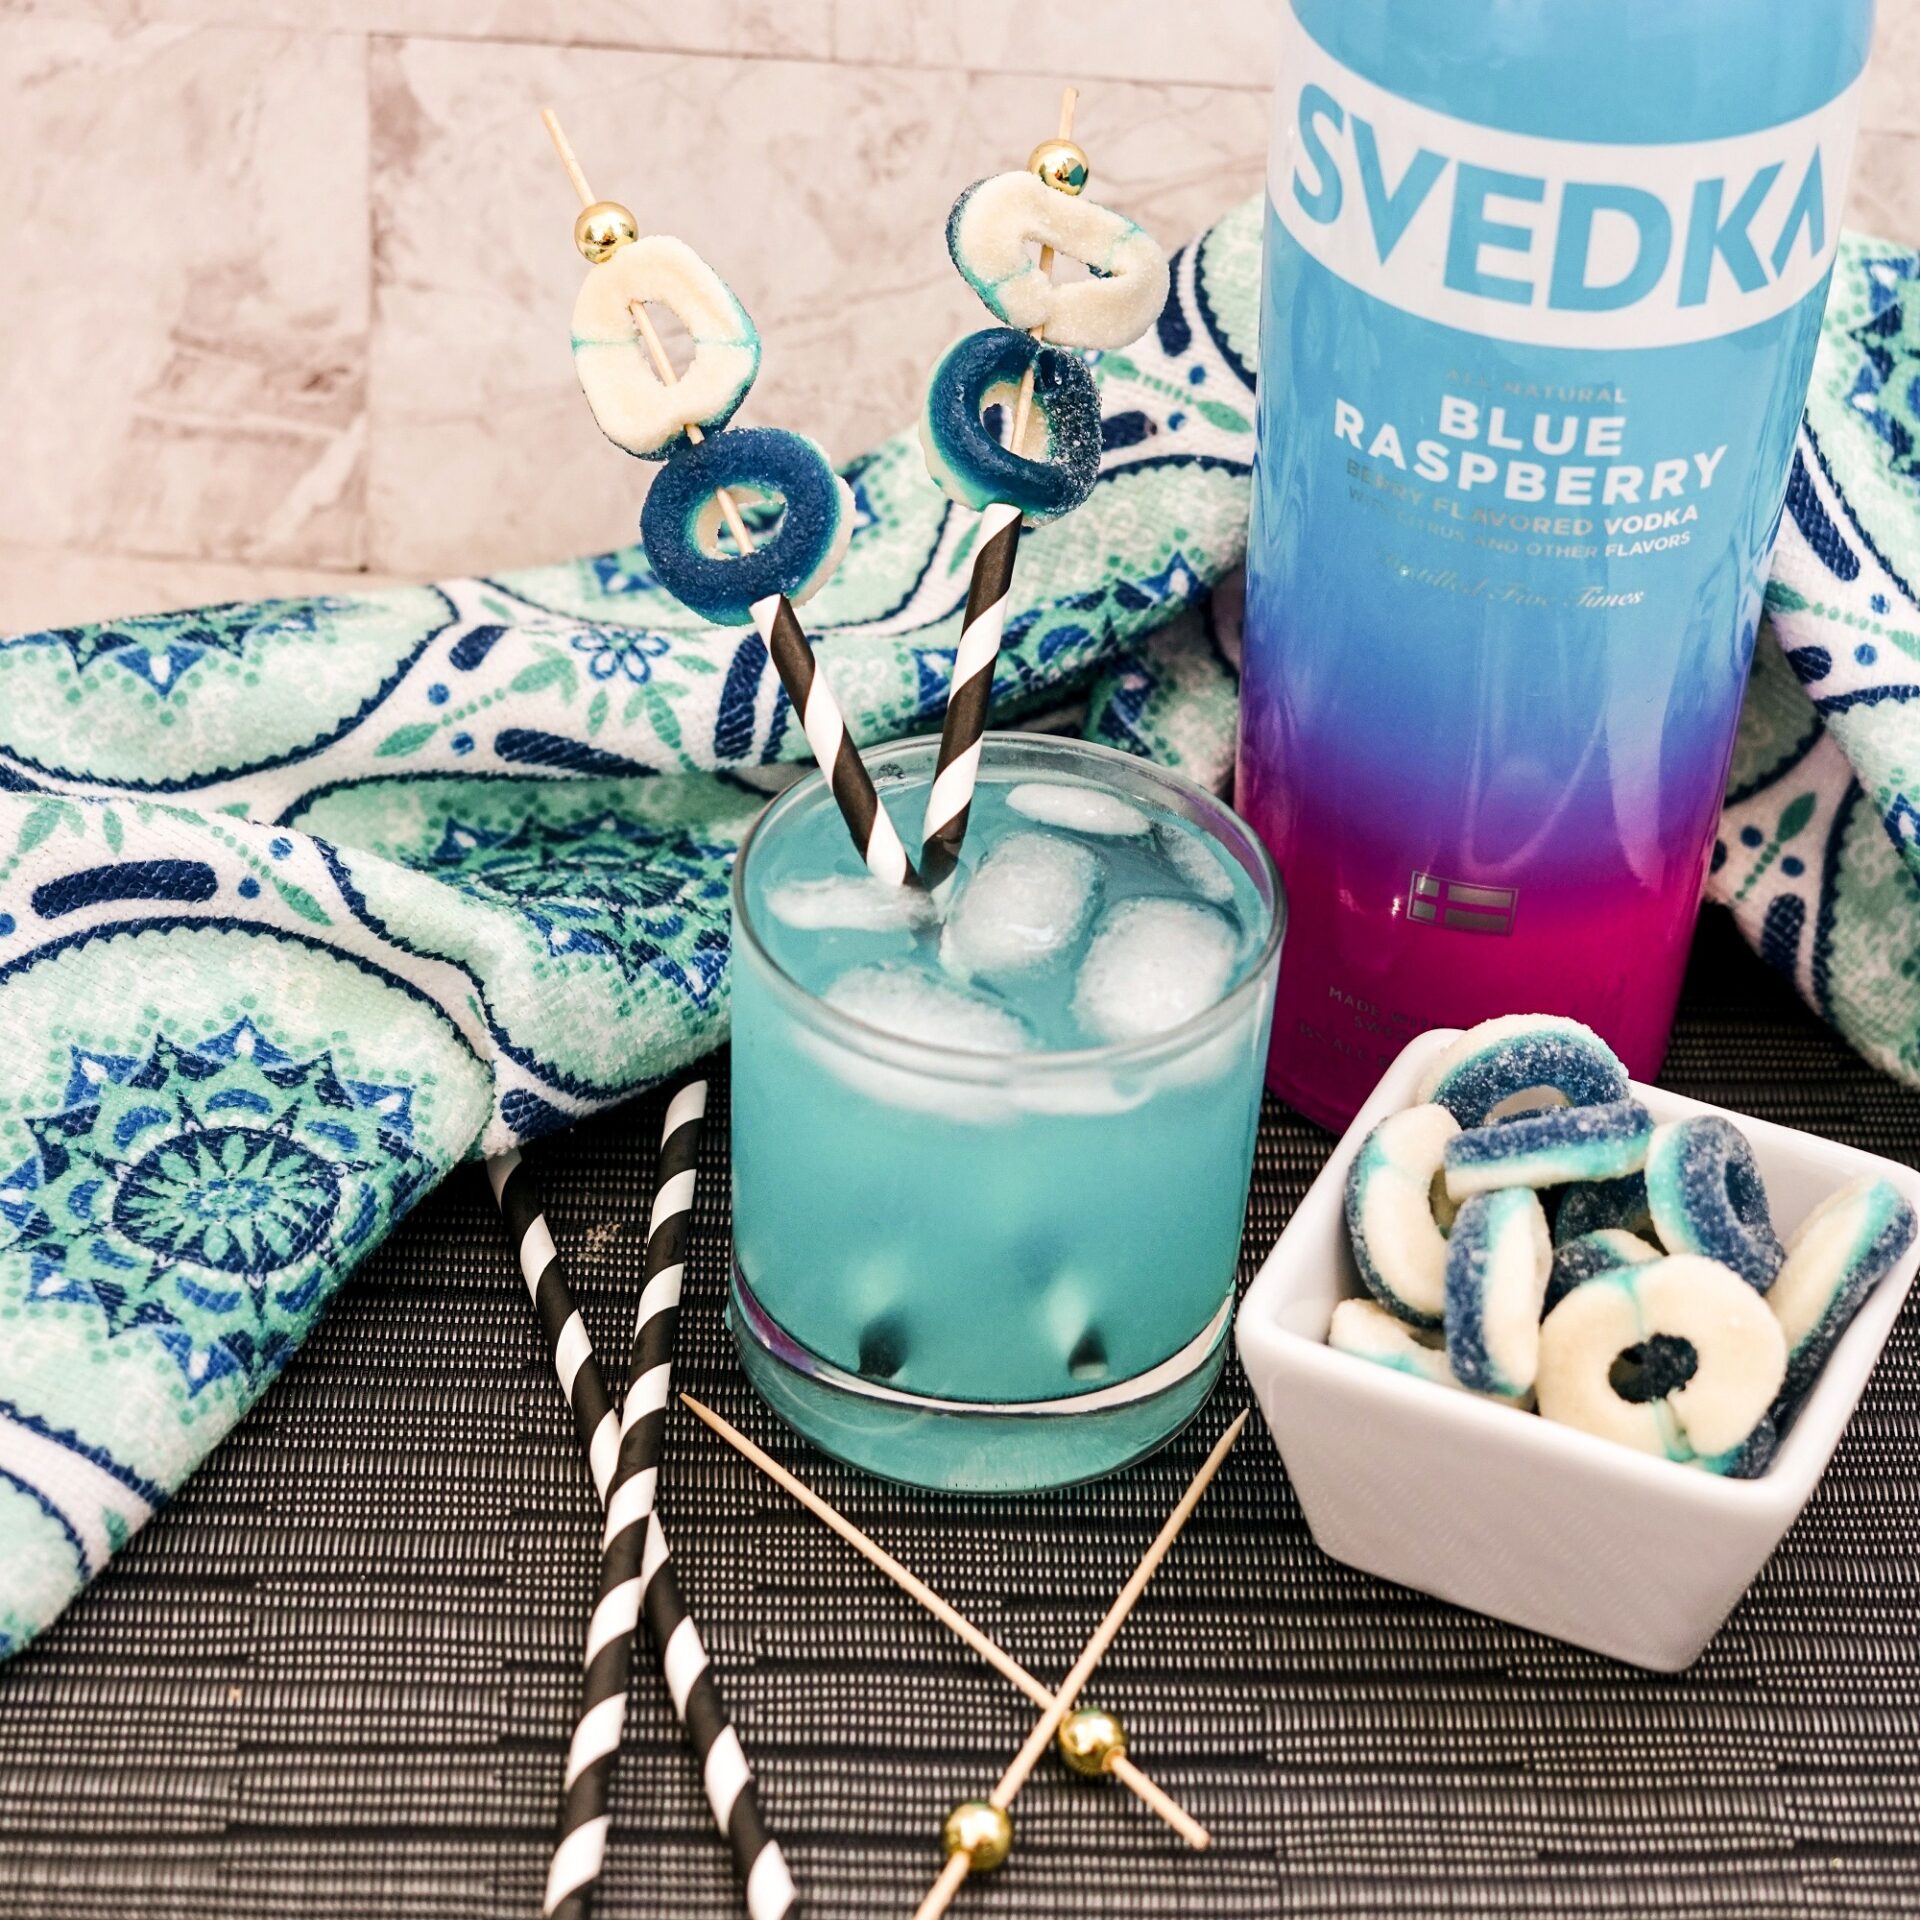 Blue raspberry vodka cocktail on a counter with ingredients.